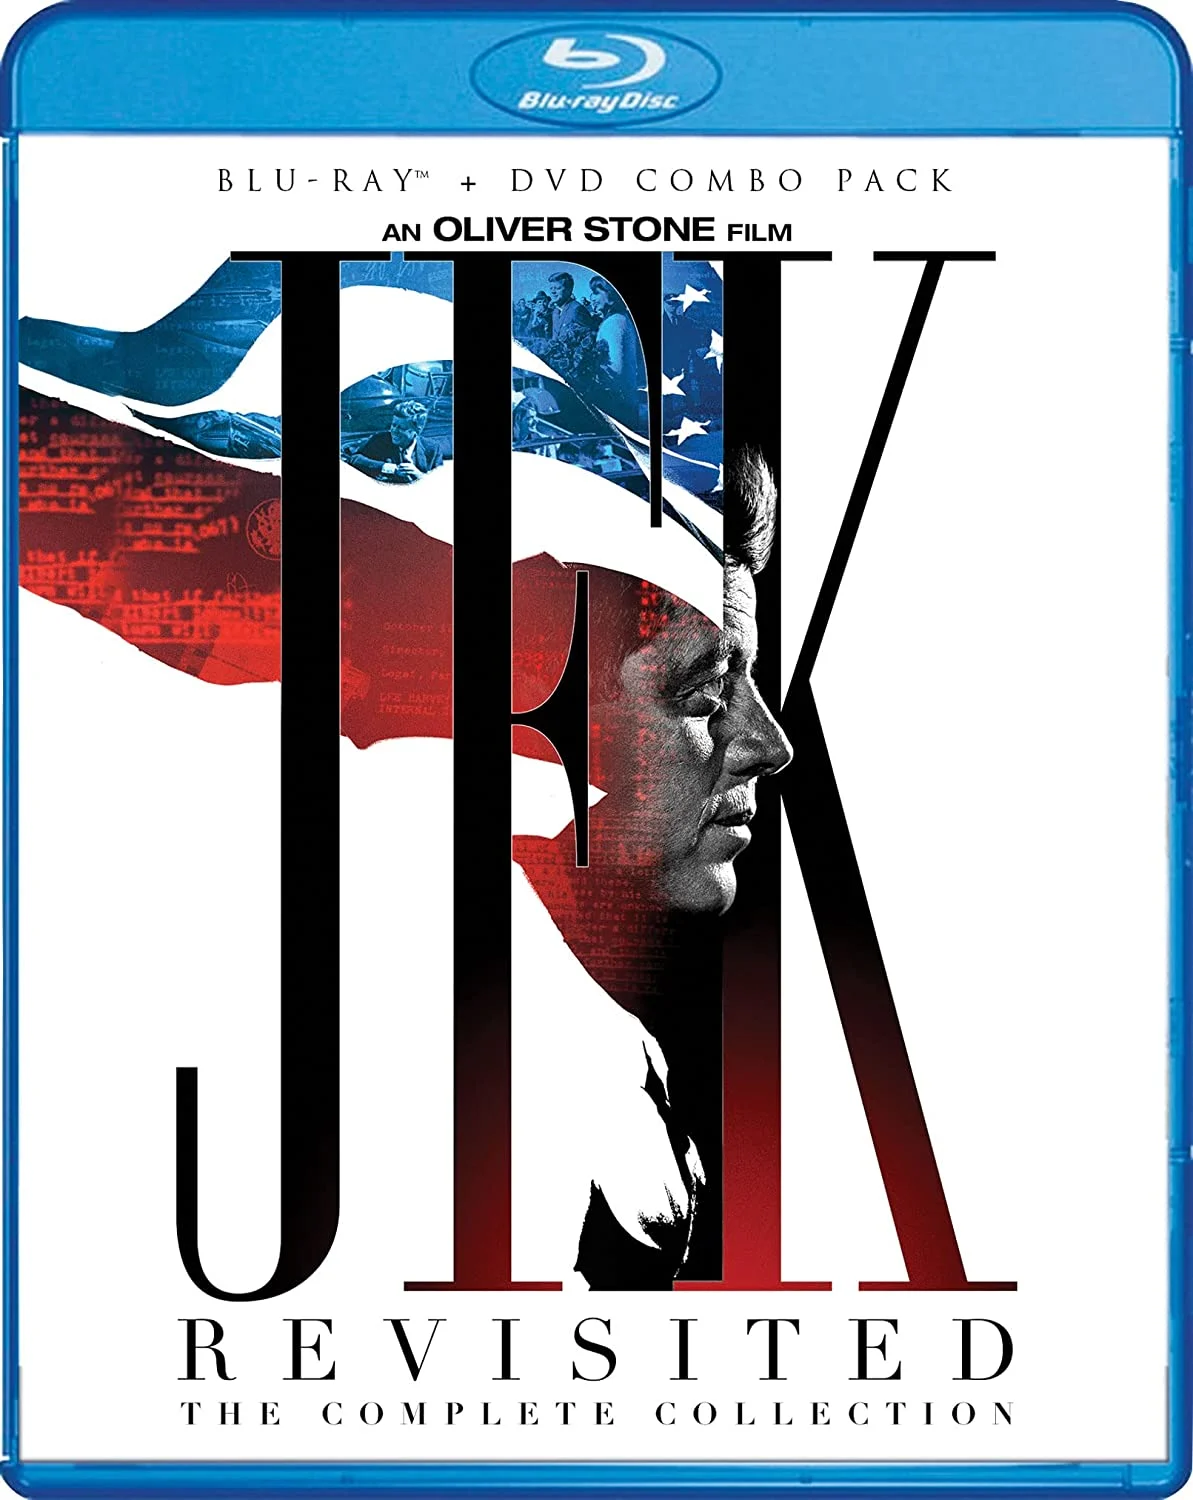 JFK Revisited – The Complete Collection (Blu-ray/DVD Combo) on MovieShack